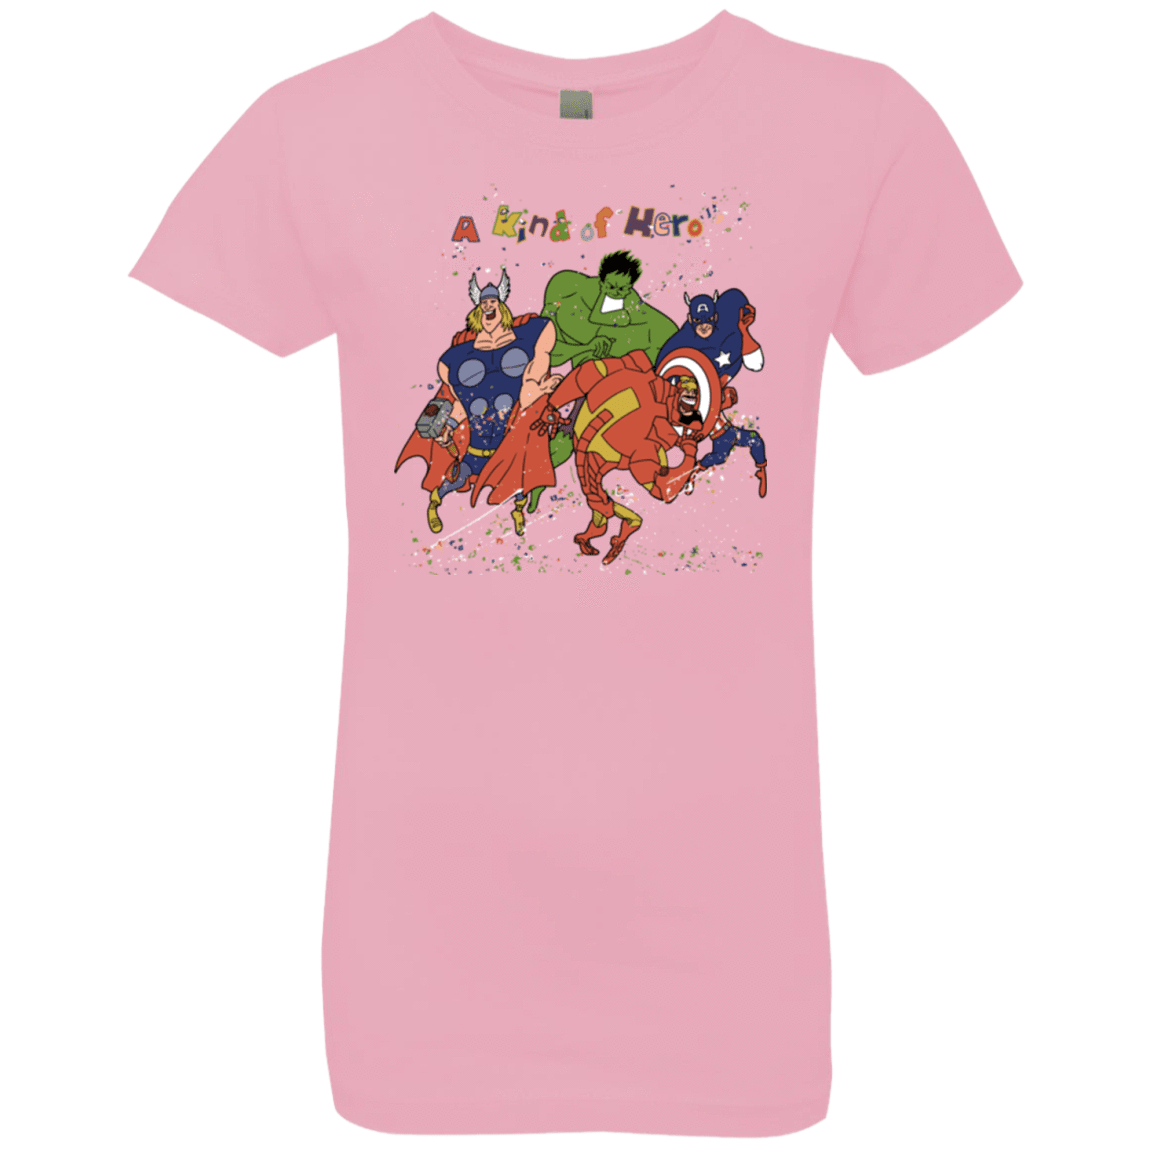 A kind of heroes Girls Premium T-Shirt